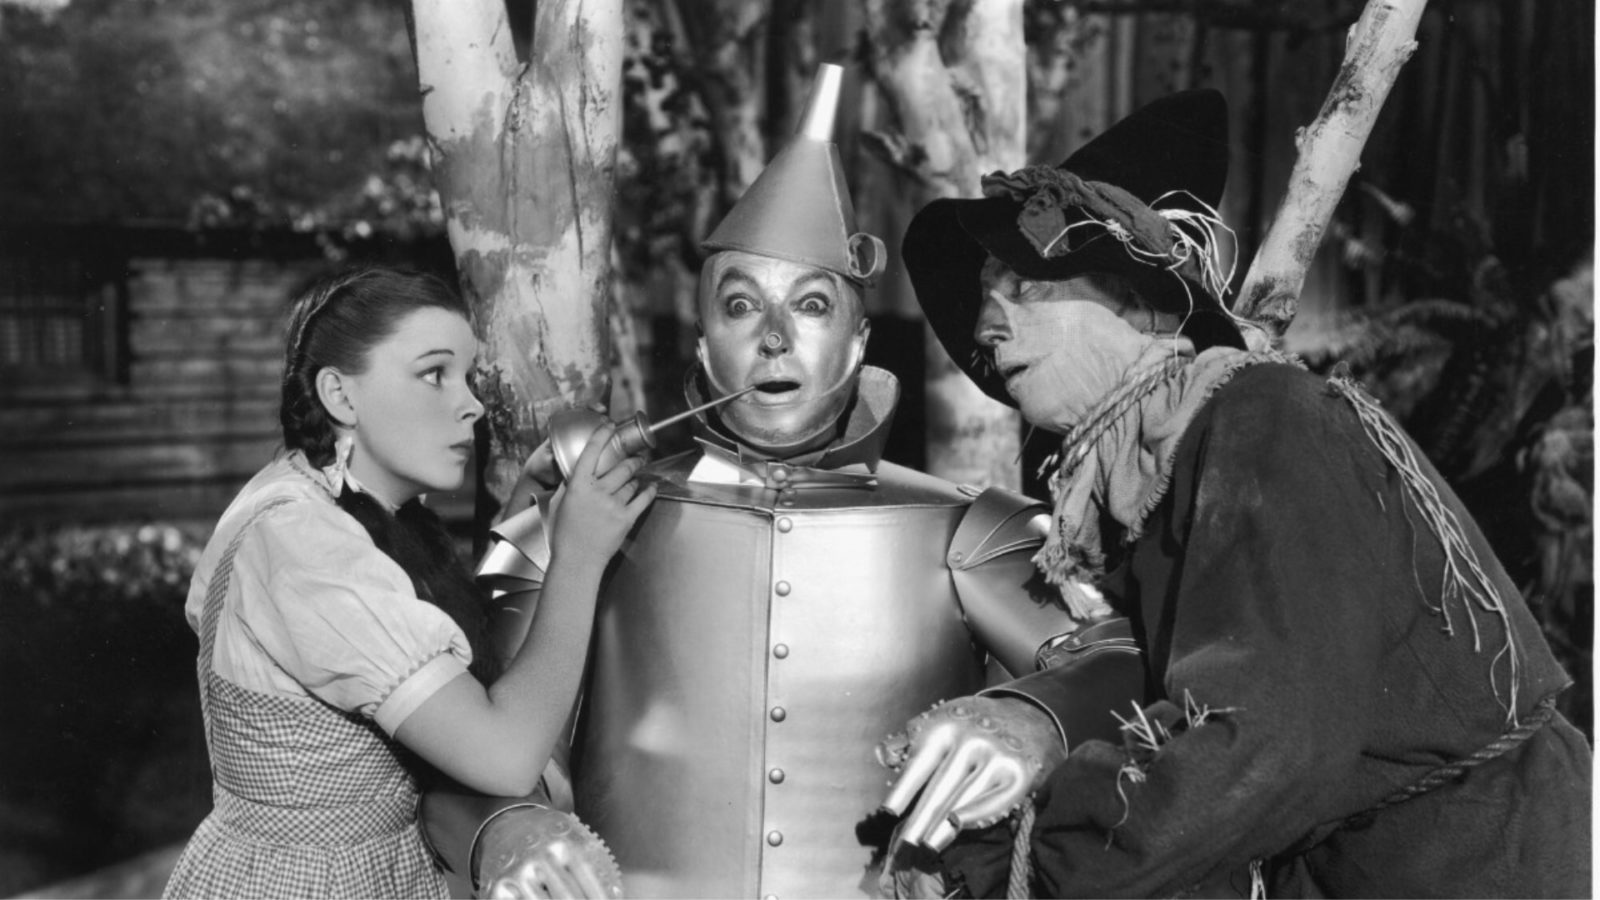 A rare prop from ‘The Wizard of Oz’ is up for auction — here’s how to bid on the Tin Man’s oil can